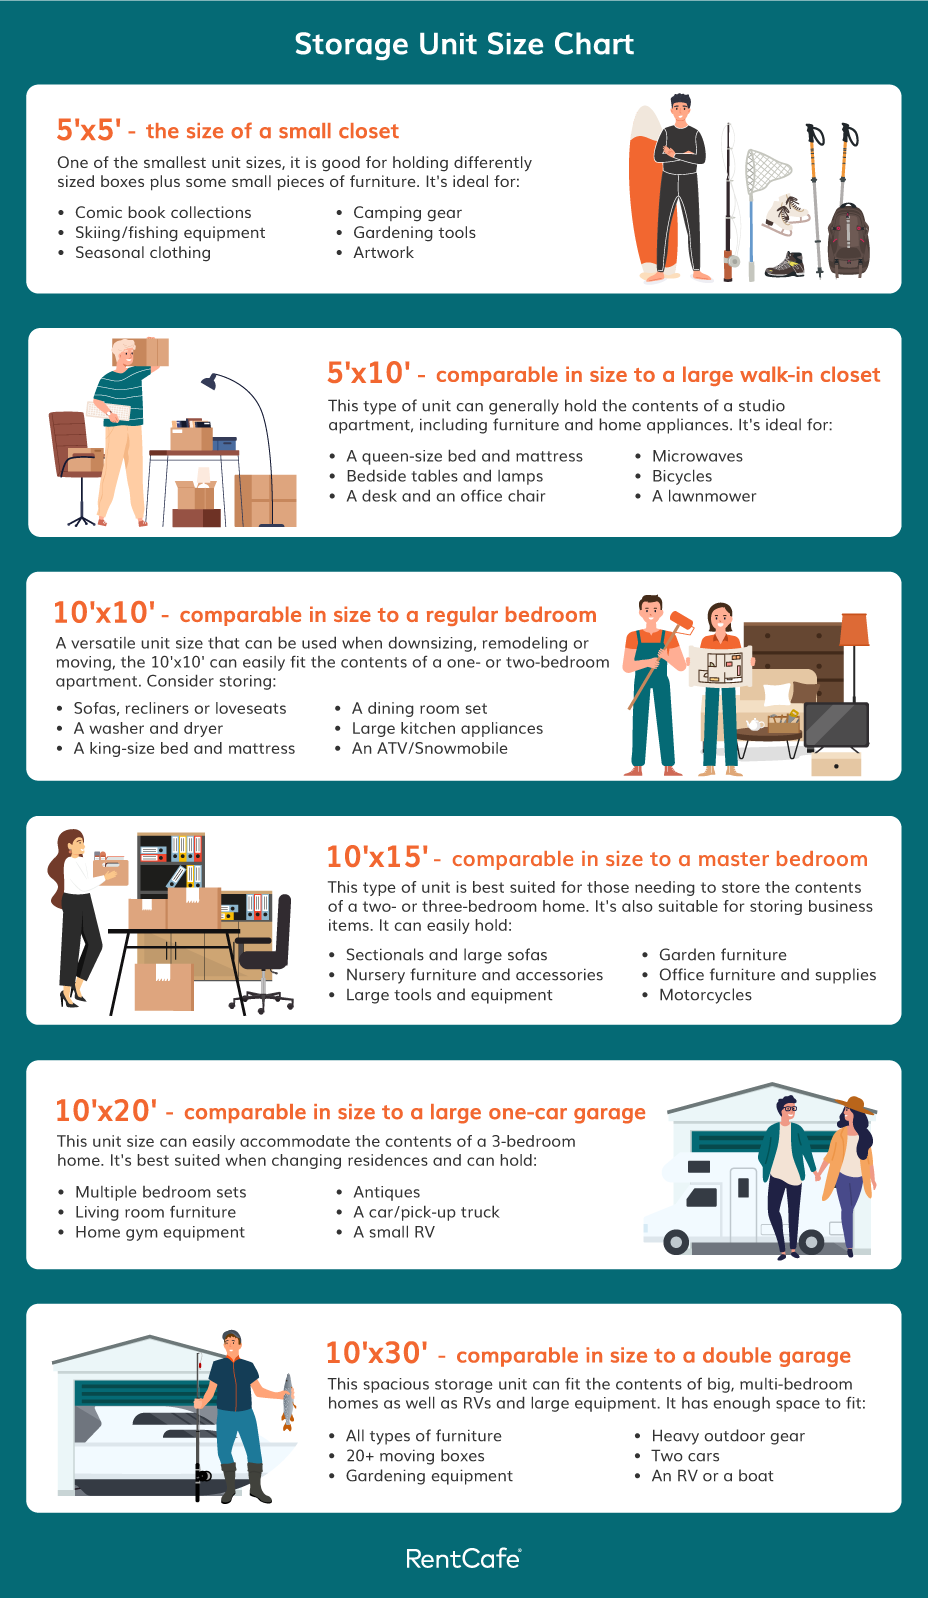 Storage Unit Size Guide Infographic